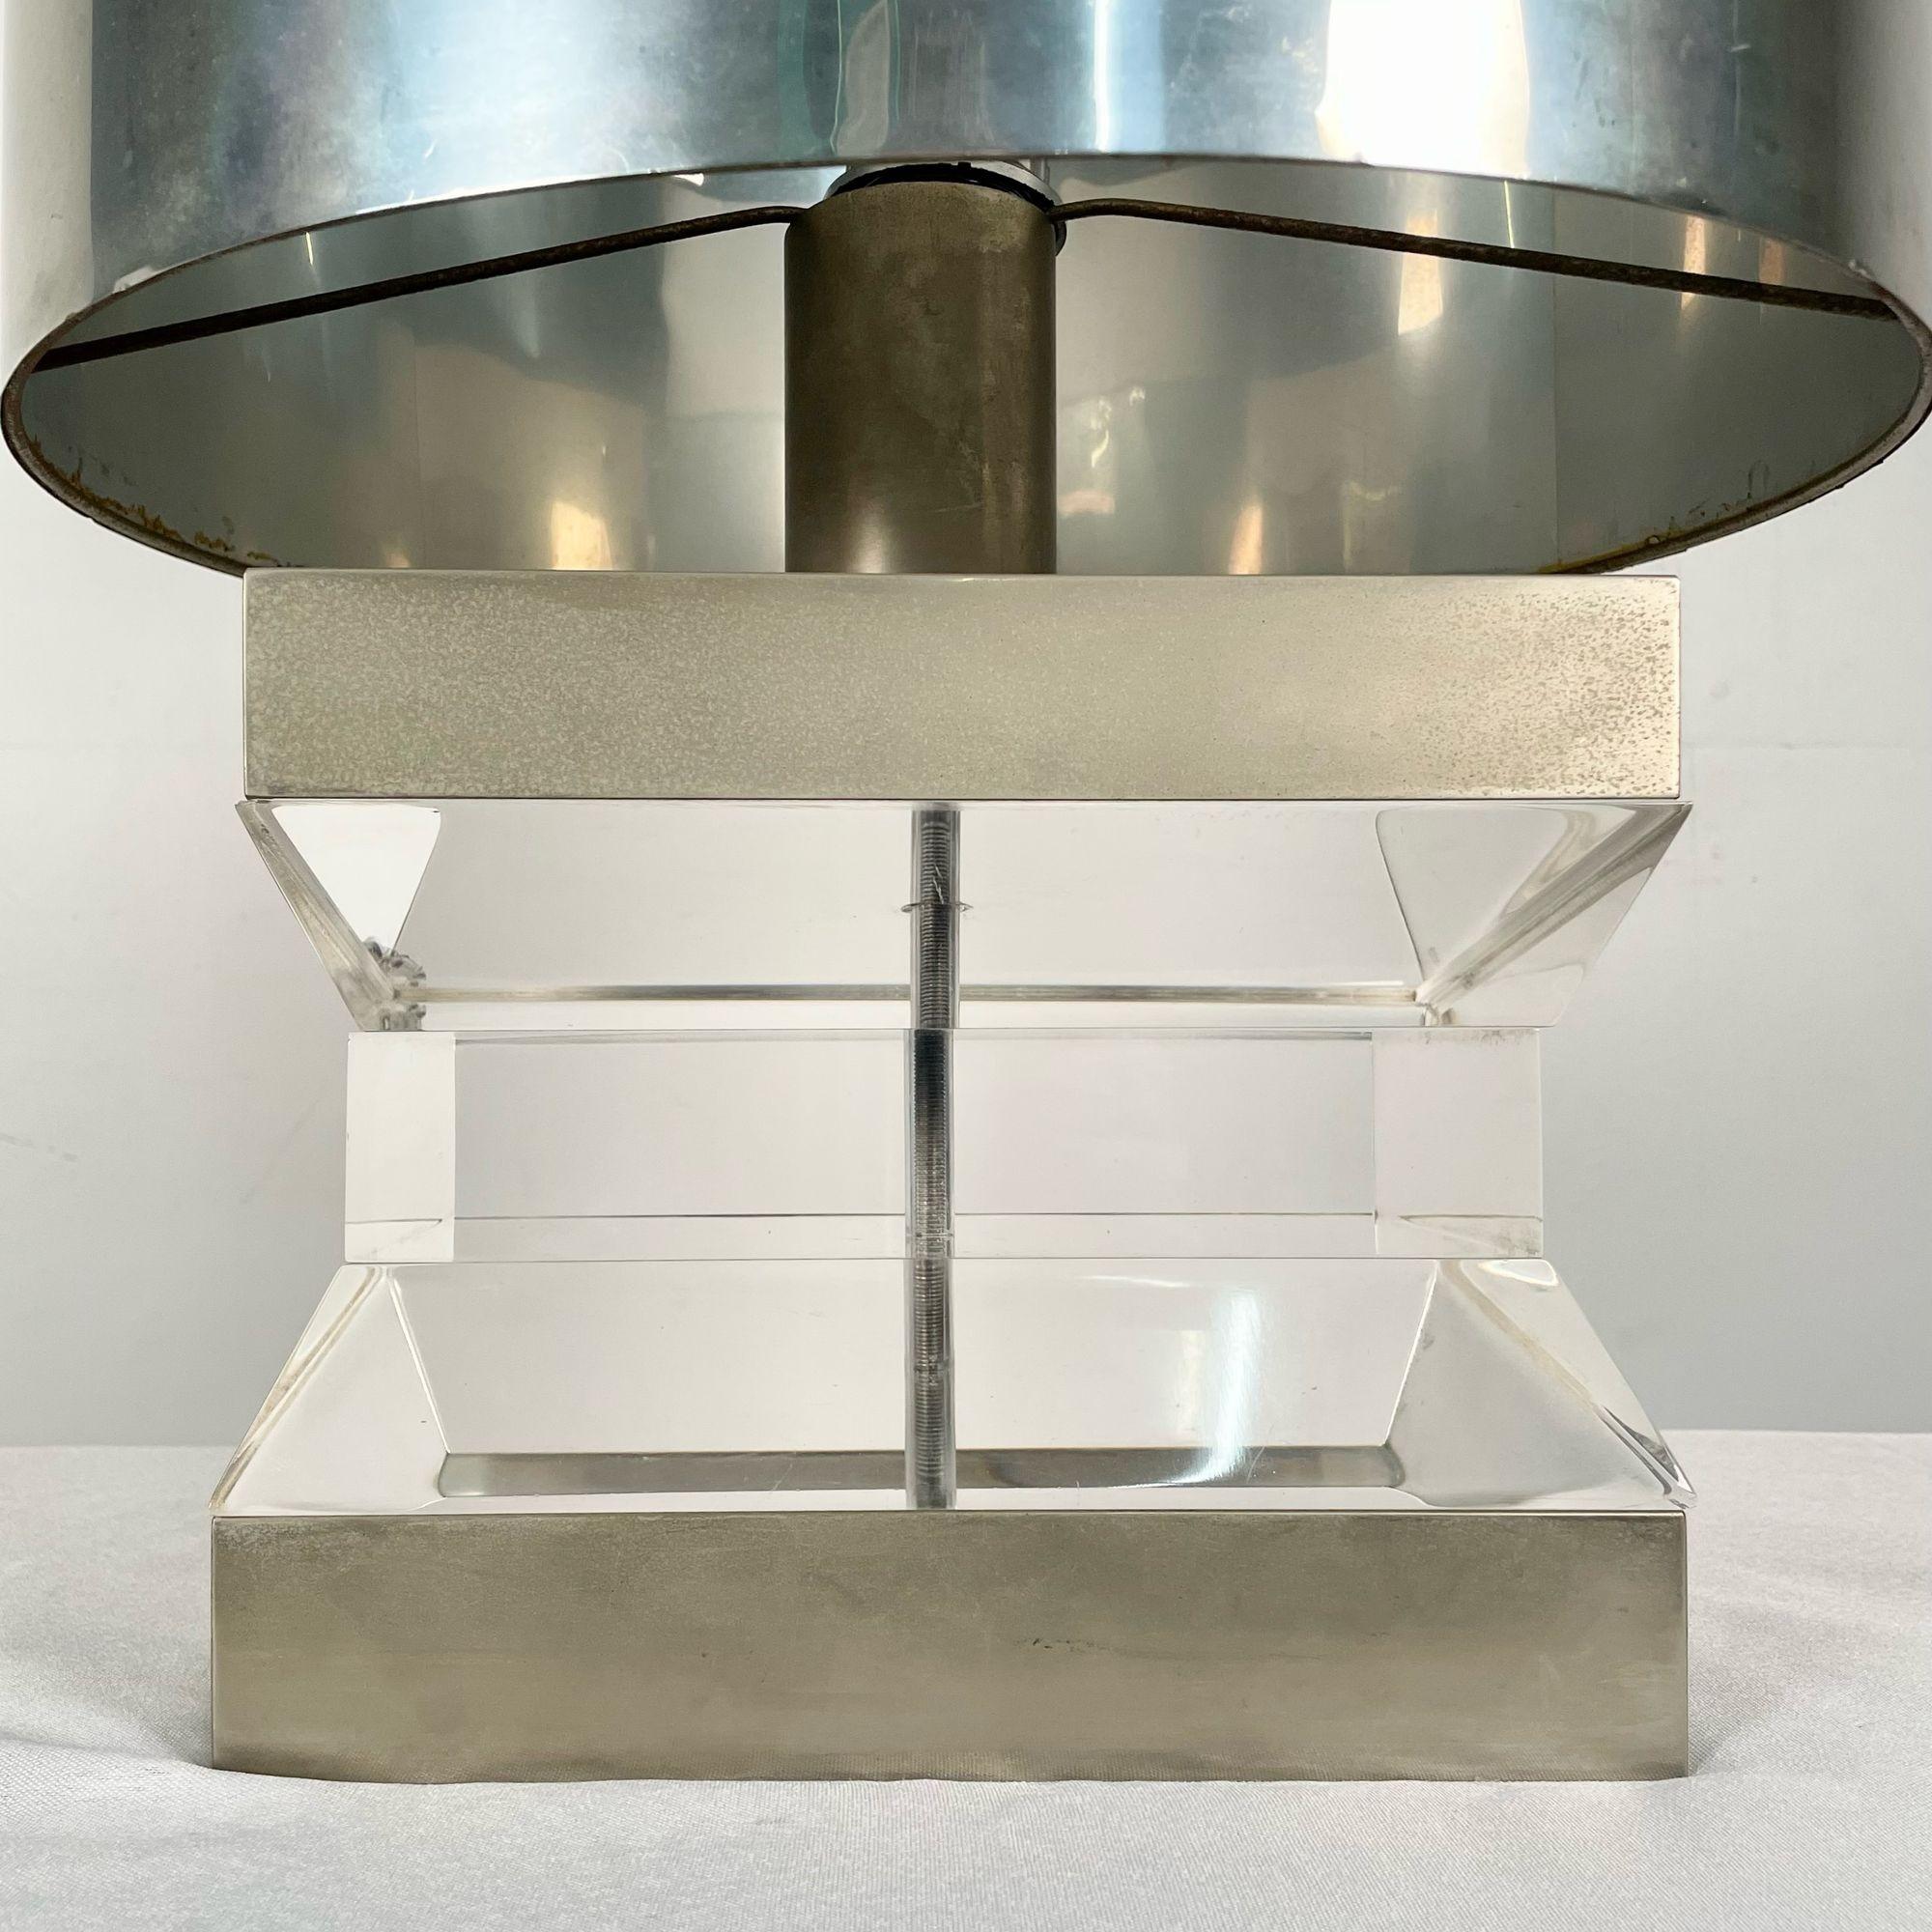 Mid-Century Modern Lucite and Chrome Table / Desk Lamp, Karl Springer Style In Good Condition For Sale In Stamford, CT